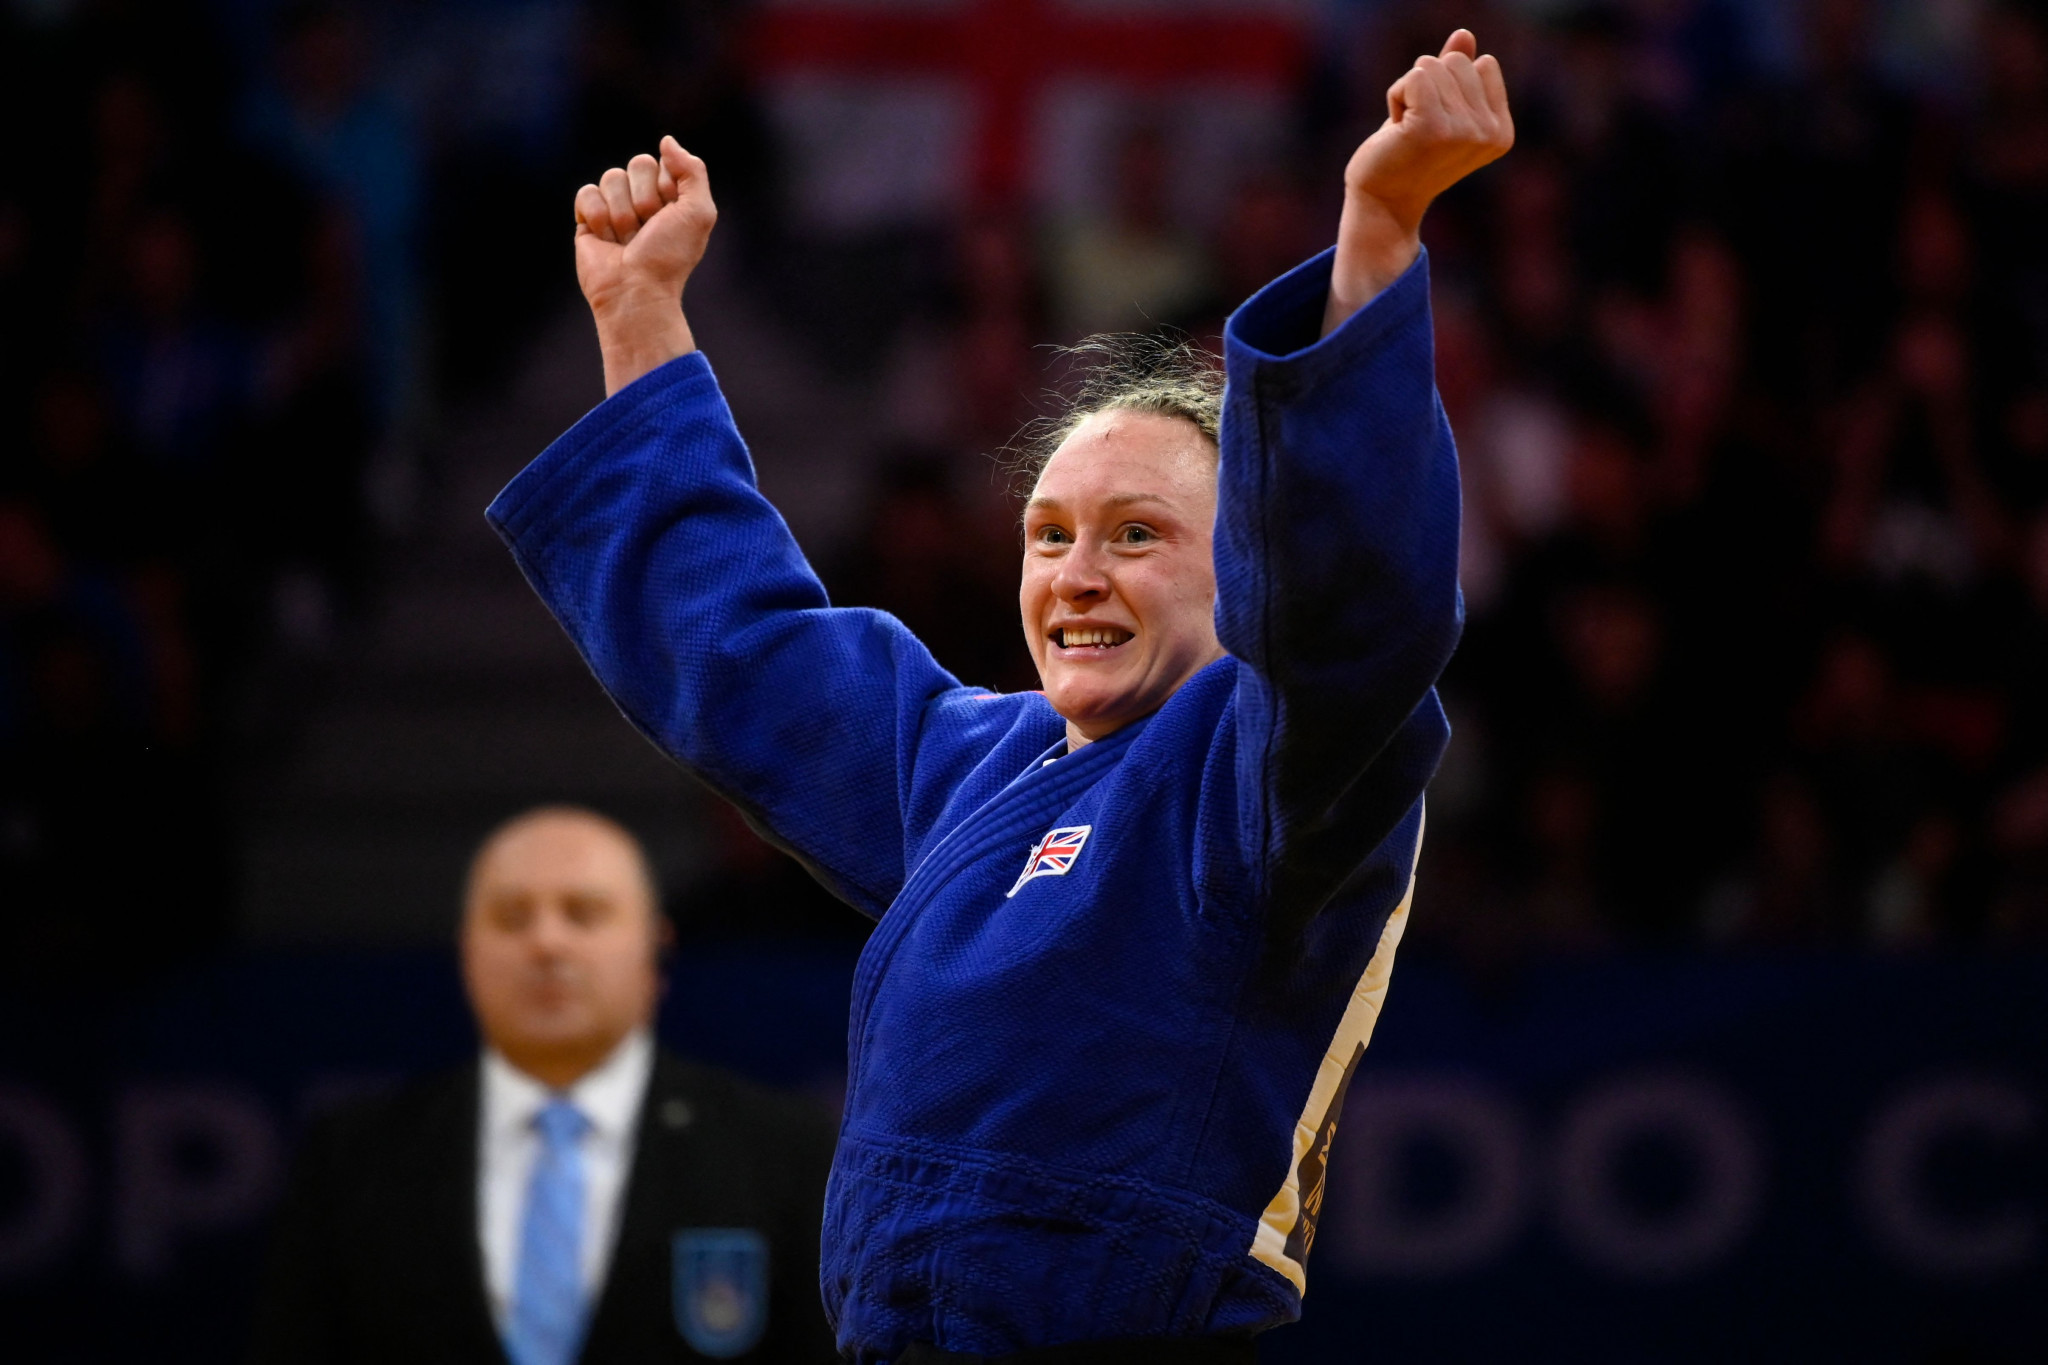 Unseeded Howell claims Britain's second gold of European Judo Championships